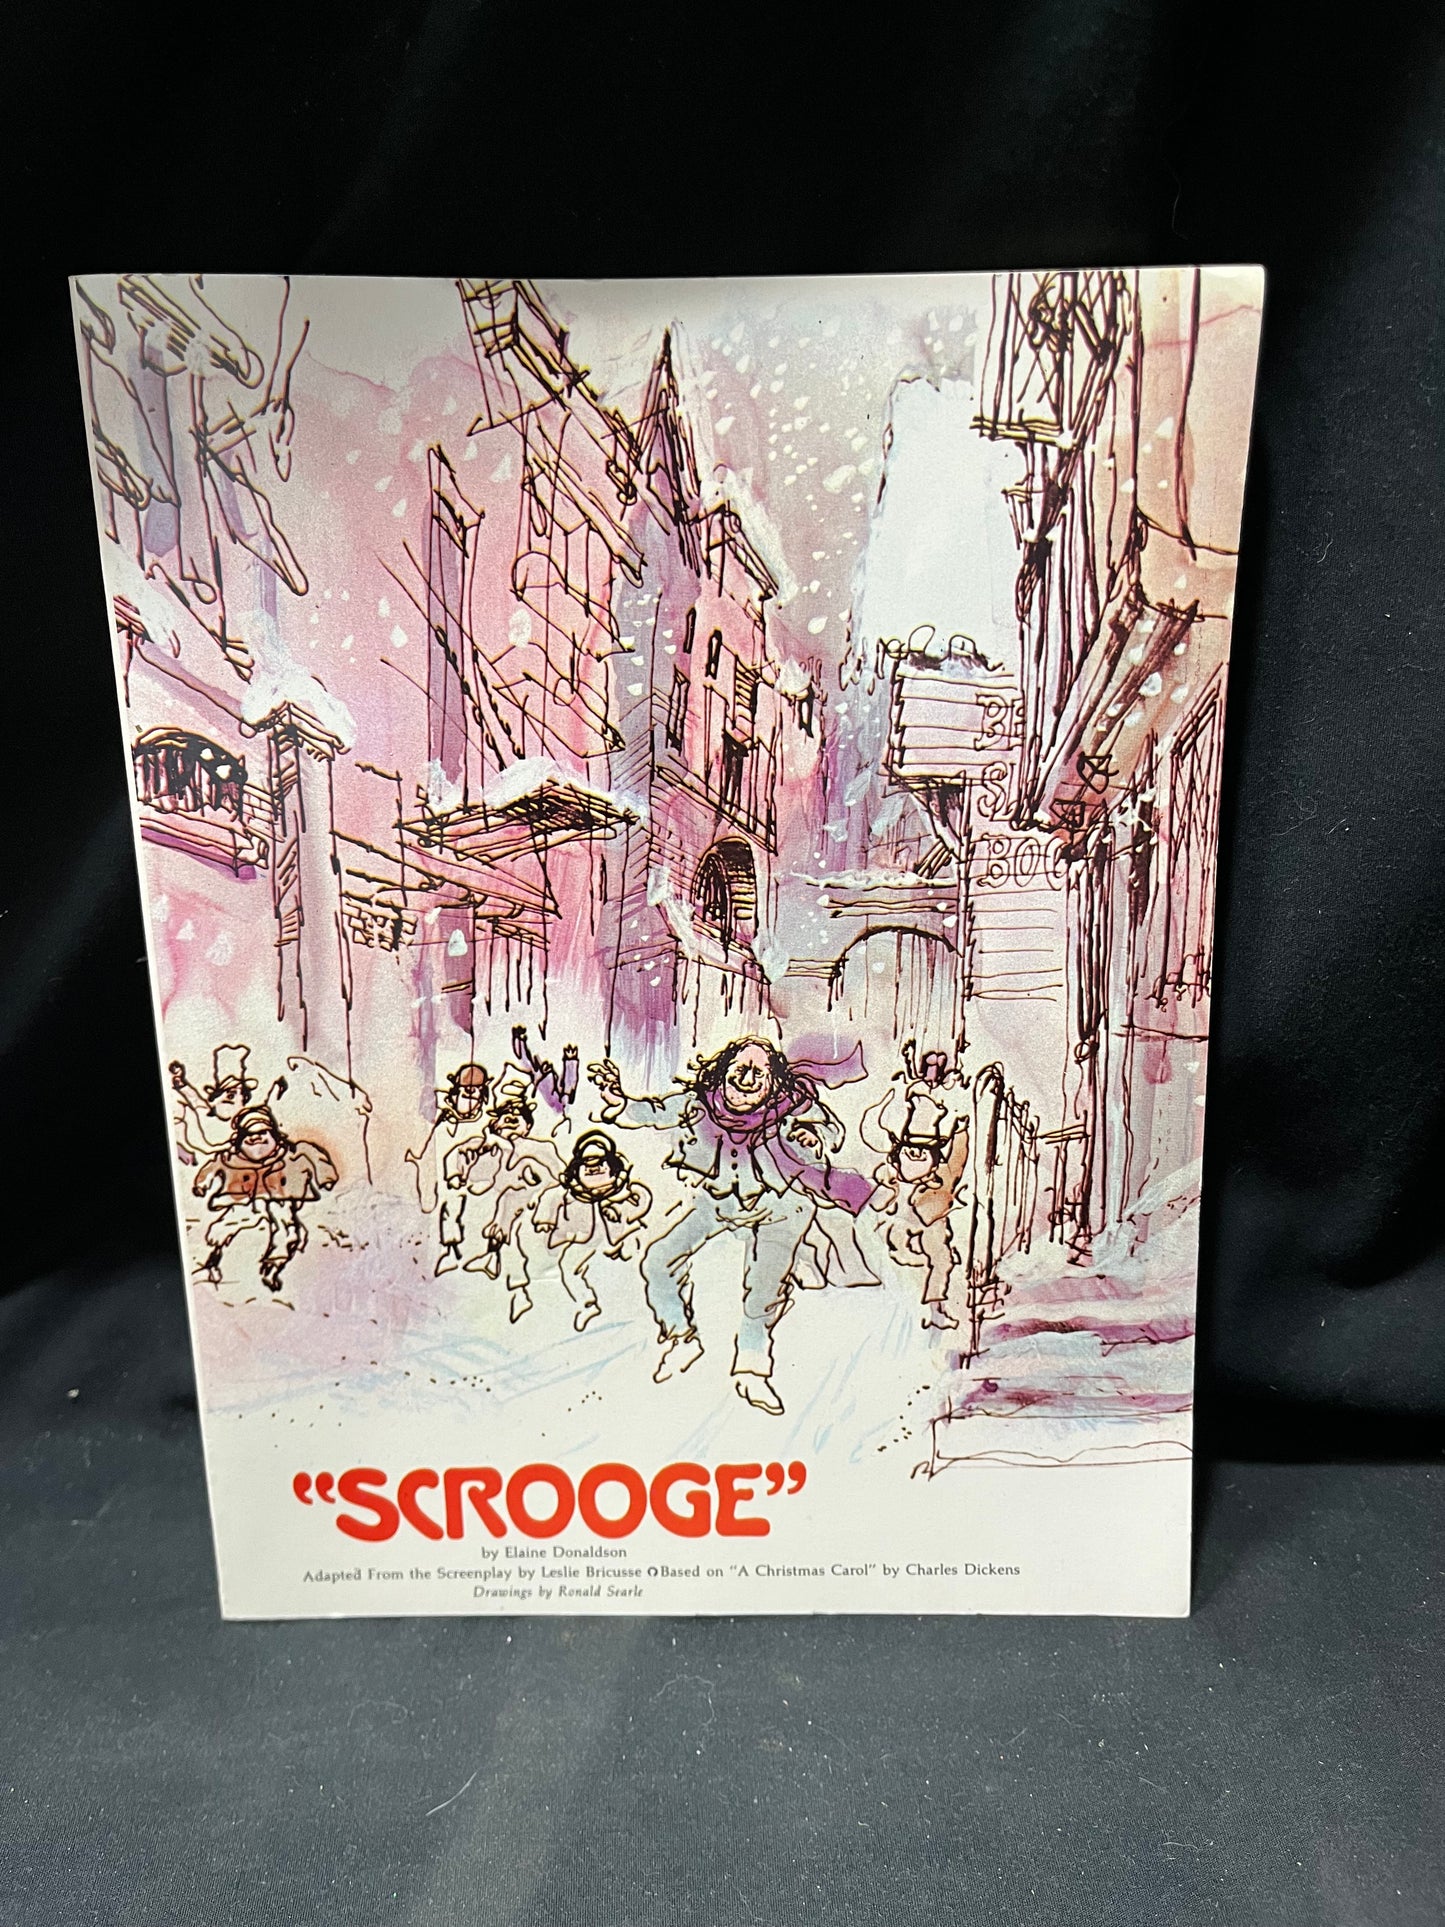 "Scrooge" by Elaine Donaldson Adapted From the Screenplay by Leslie Bricusse - Paperback